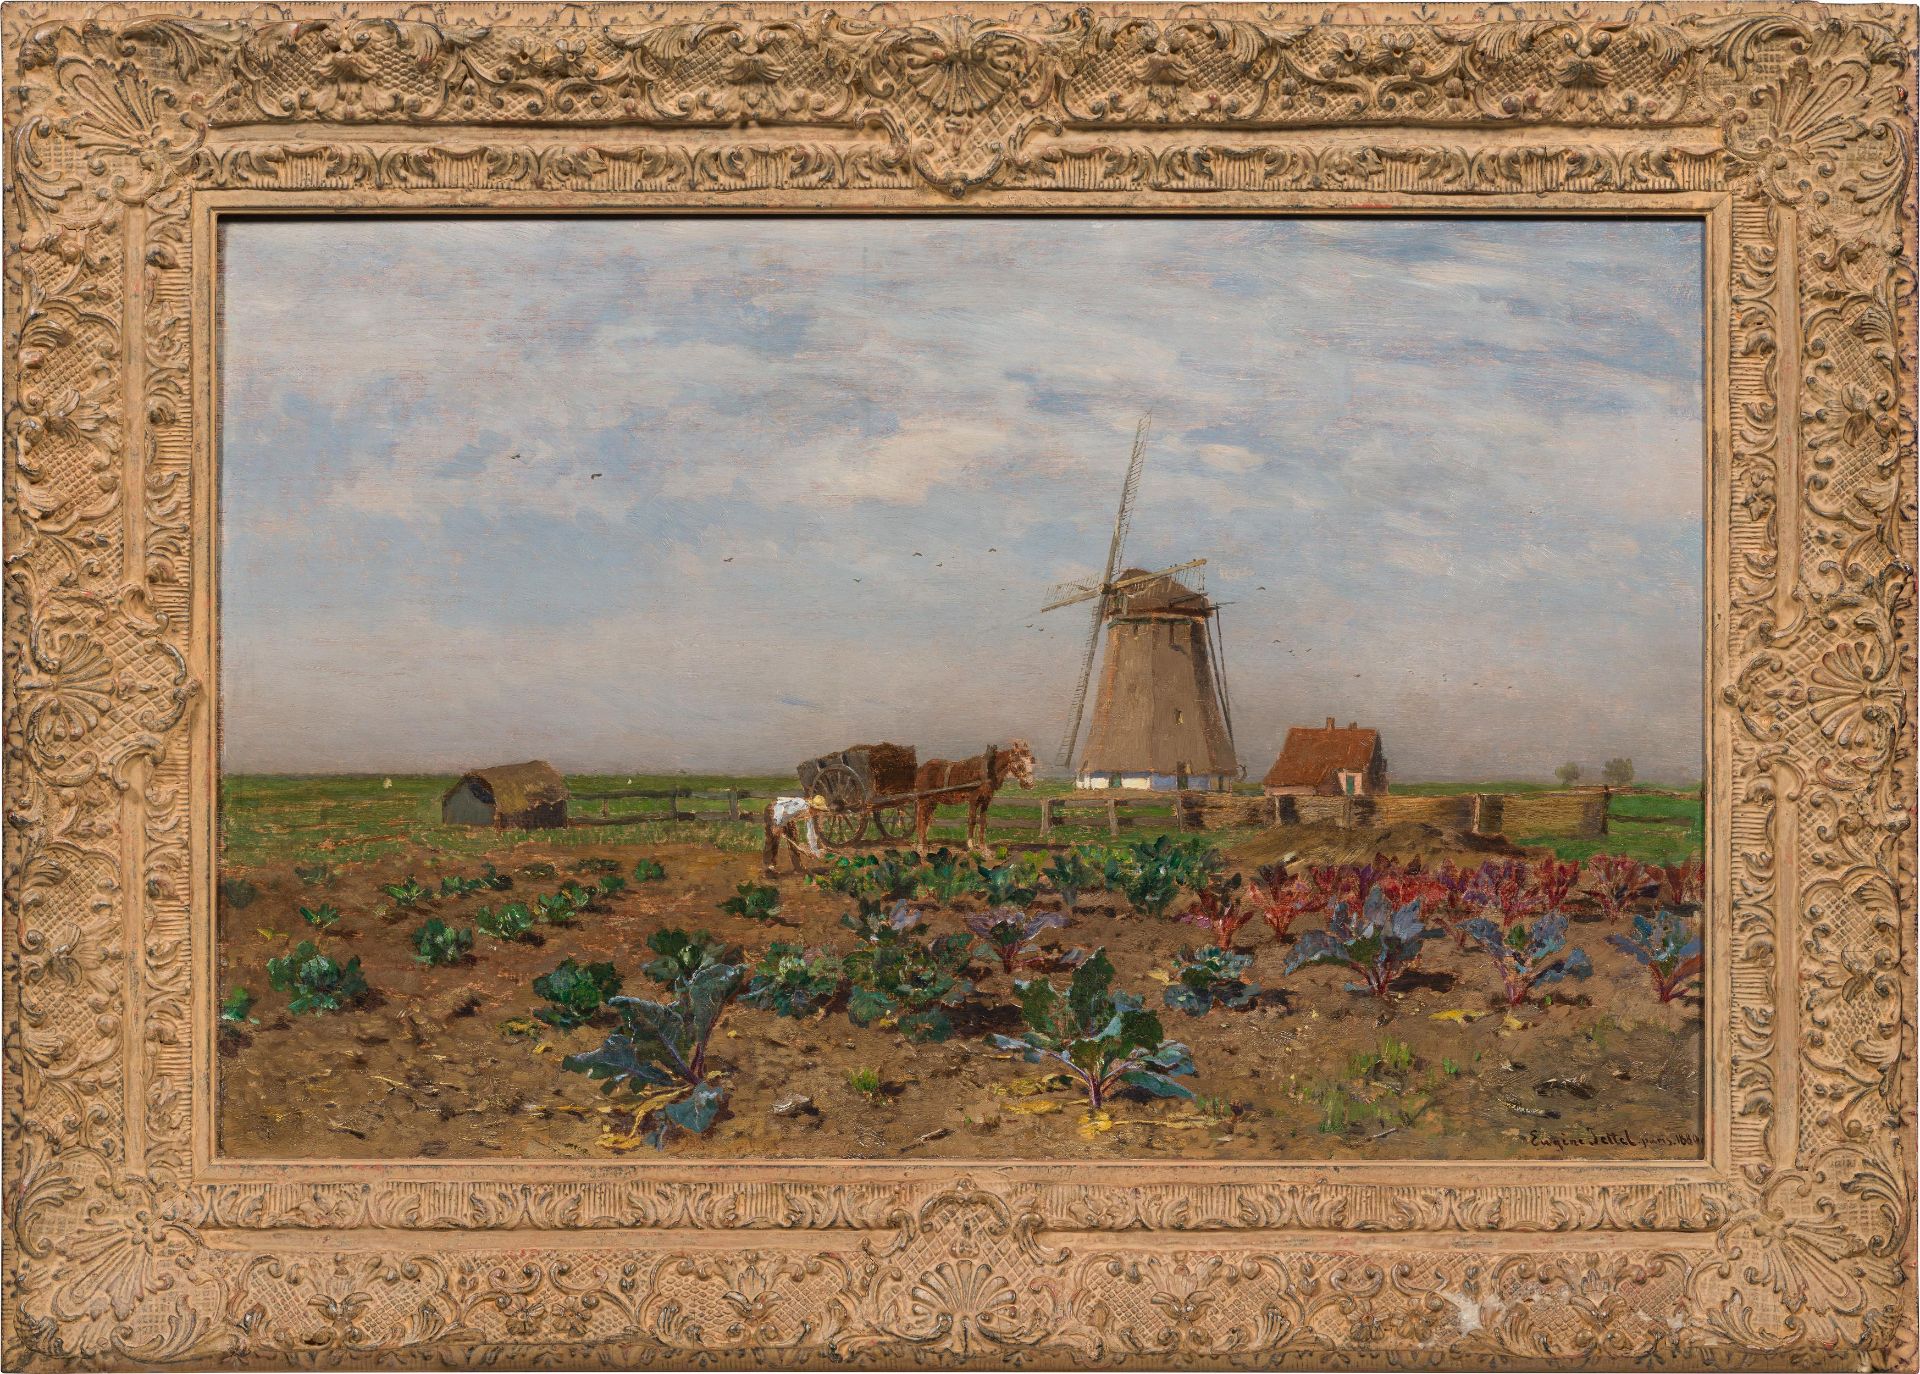 Eugen Jettel: Red cabbage field in Holland - Image 2 of 2